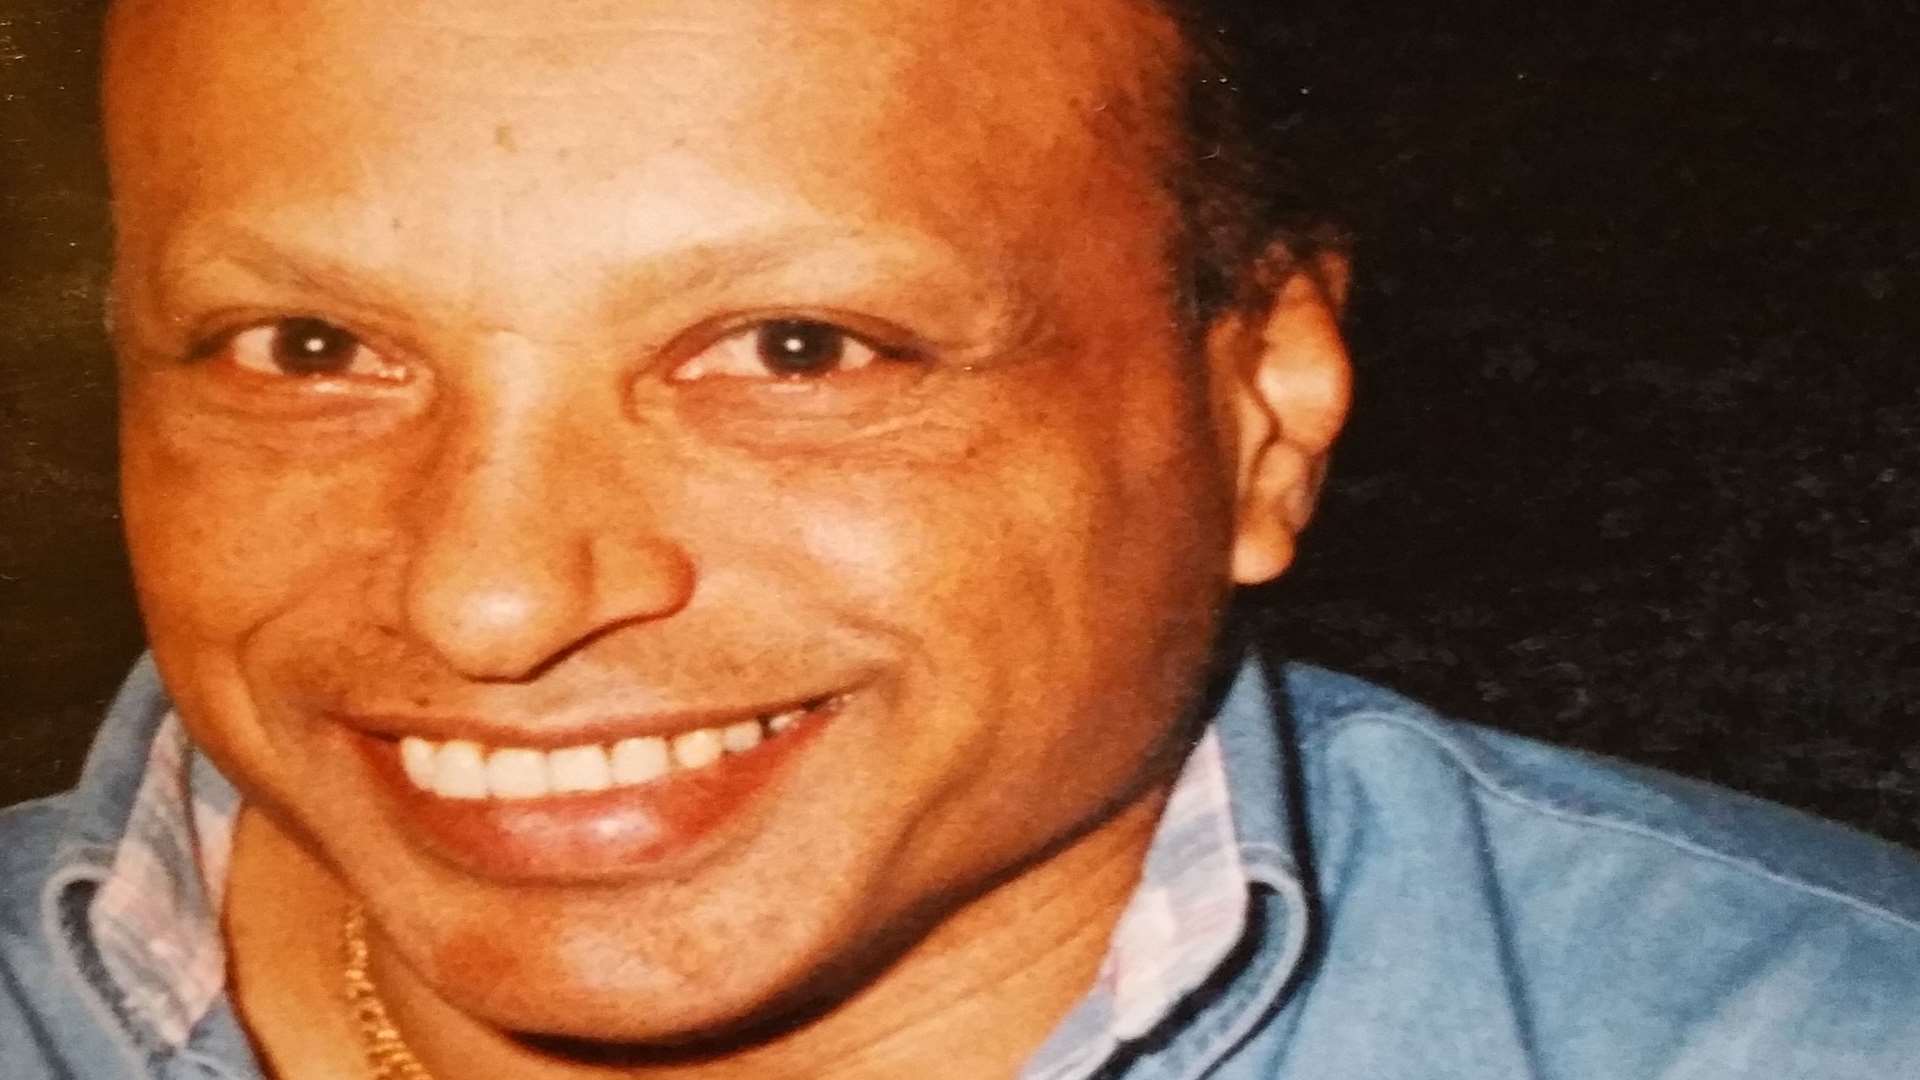 Napoleon Desouza is missing, without his medication. Picture: Kent Police